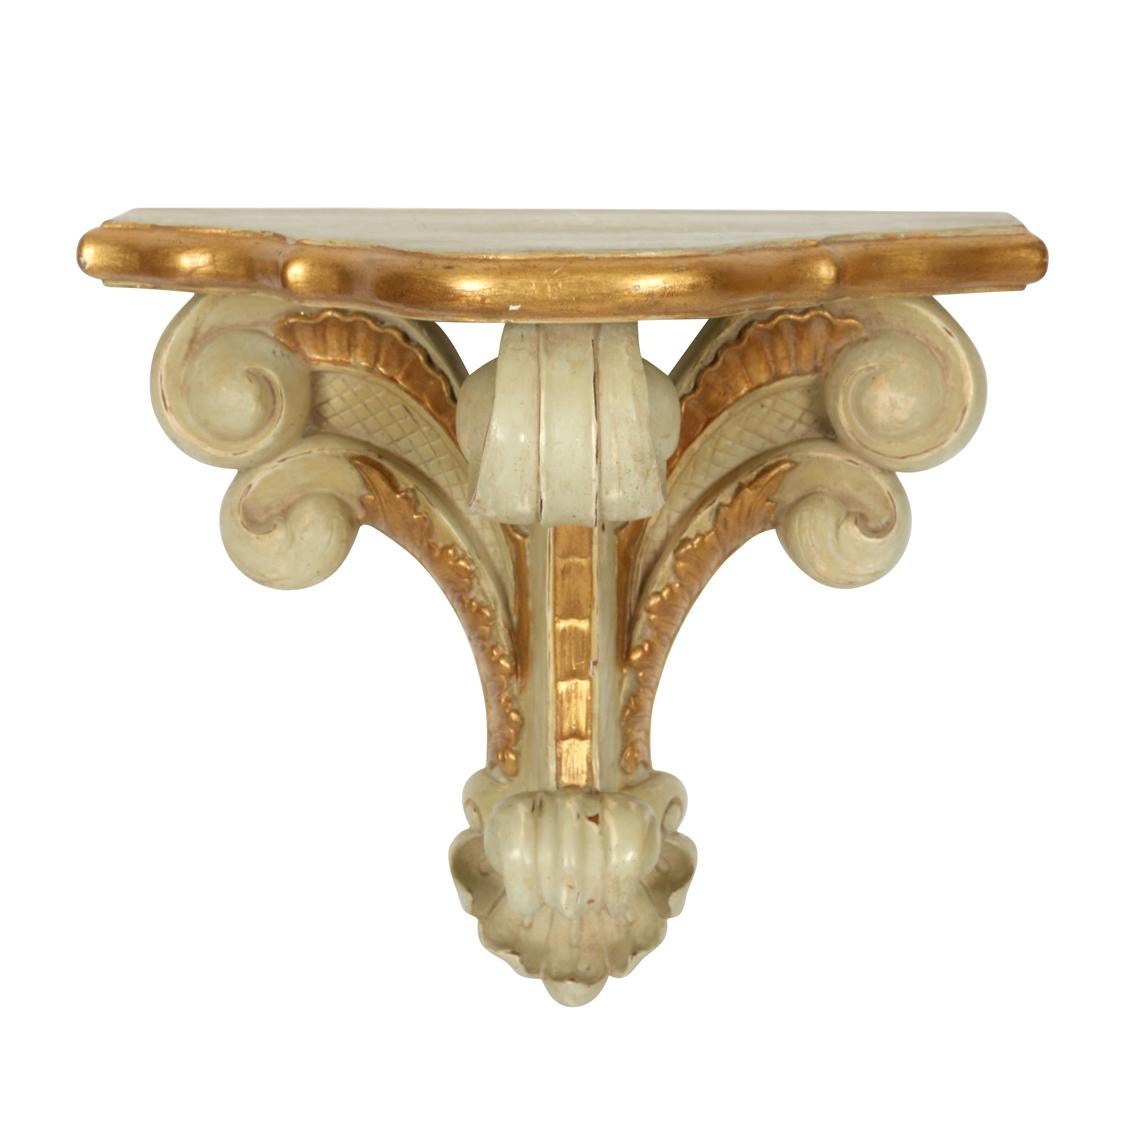 Carved wall brackets in the style of Serge Roche with scroll form and brushed gilt finish.